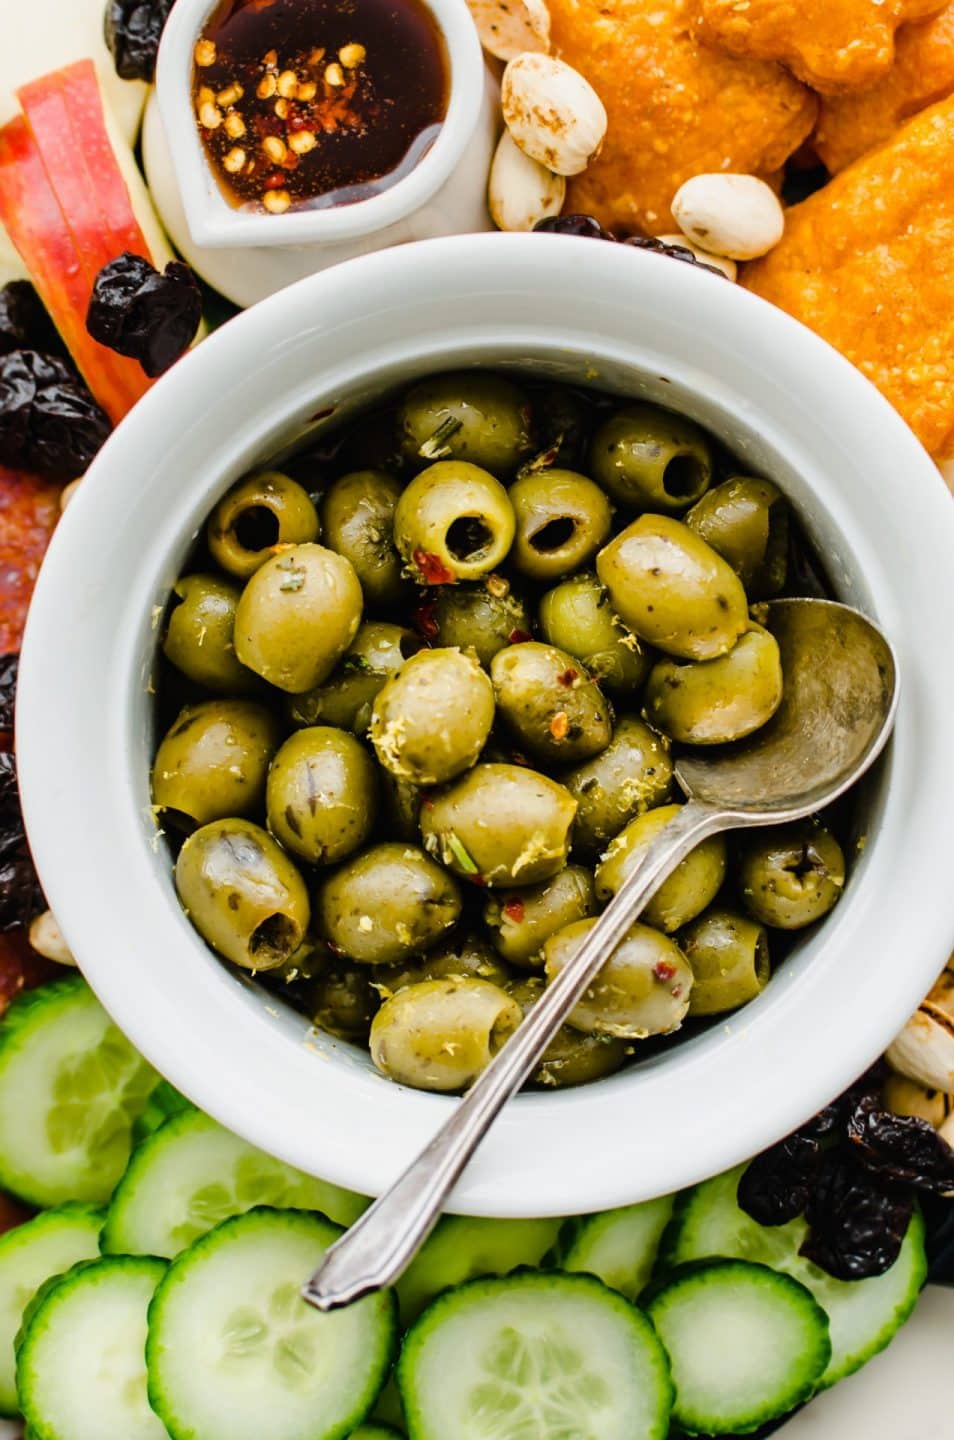 A close-up shot of a bowl of warm olives with lemon and rosemary on a cheese board.